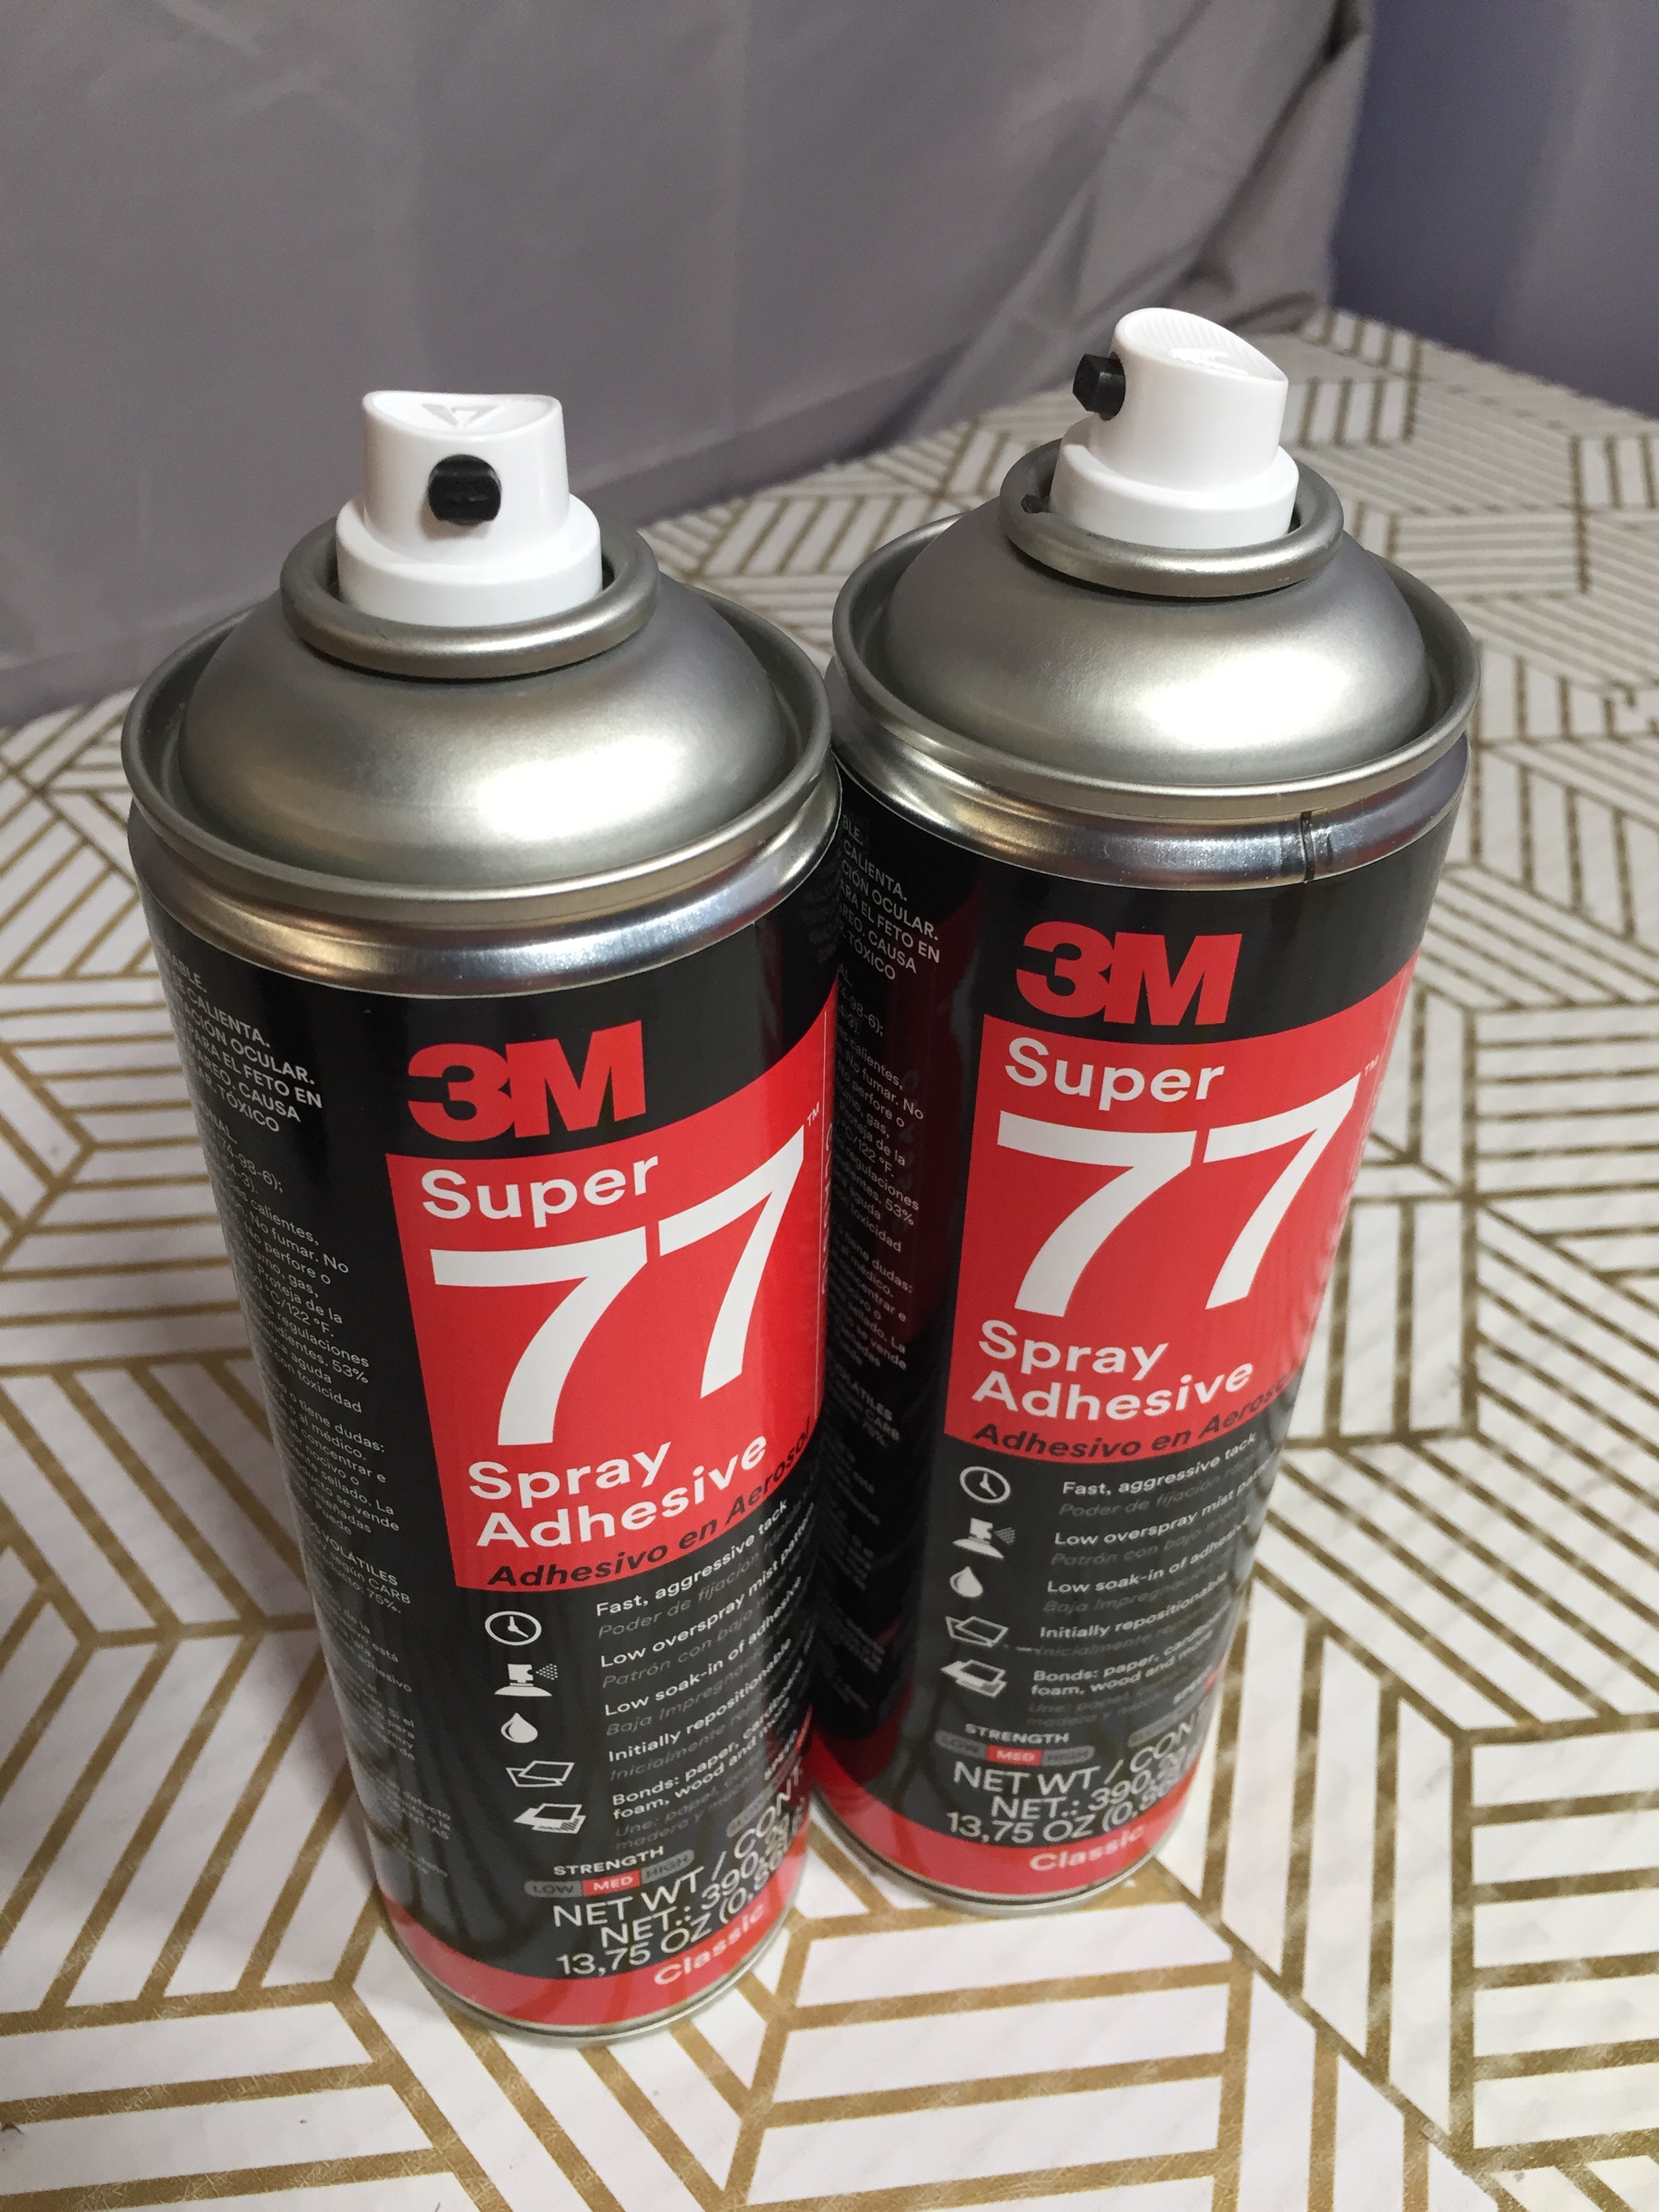 3M SUPER 77 Spray Adhesive Classic | 2 CANS | **EXPIRED** (8201332130030)